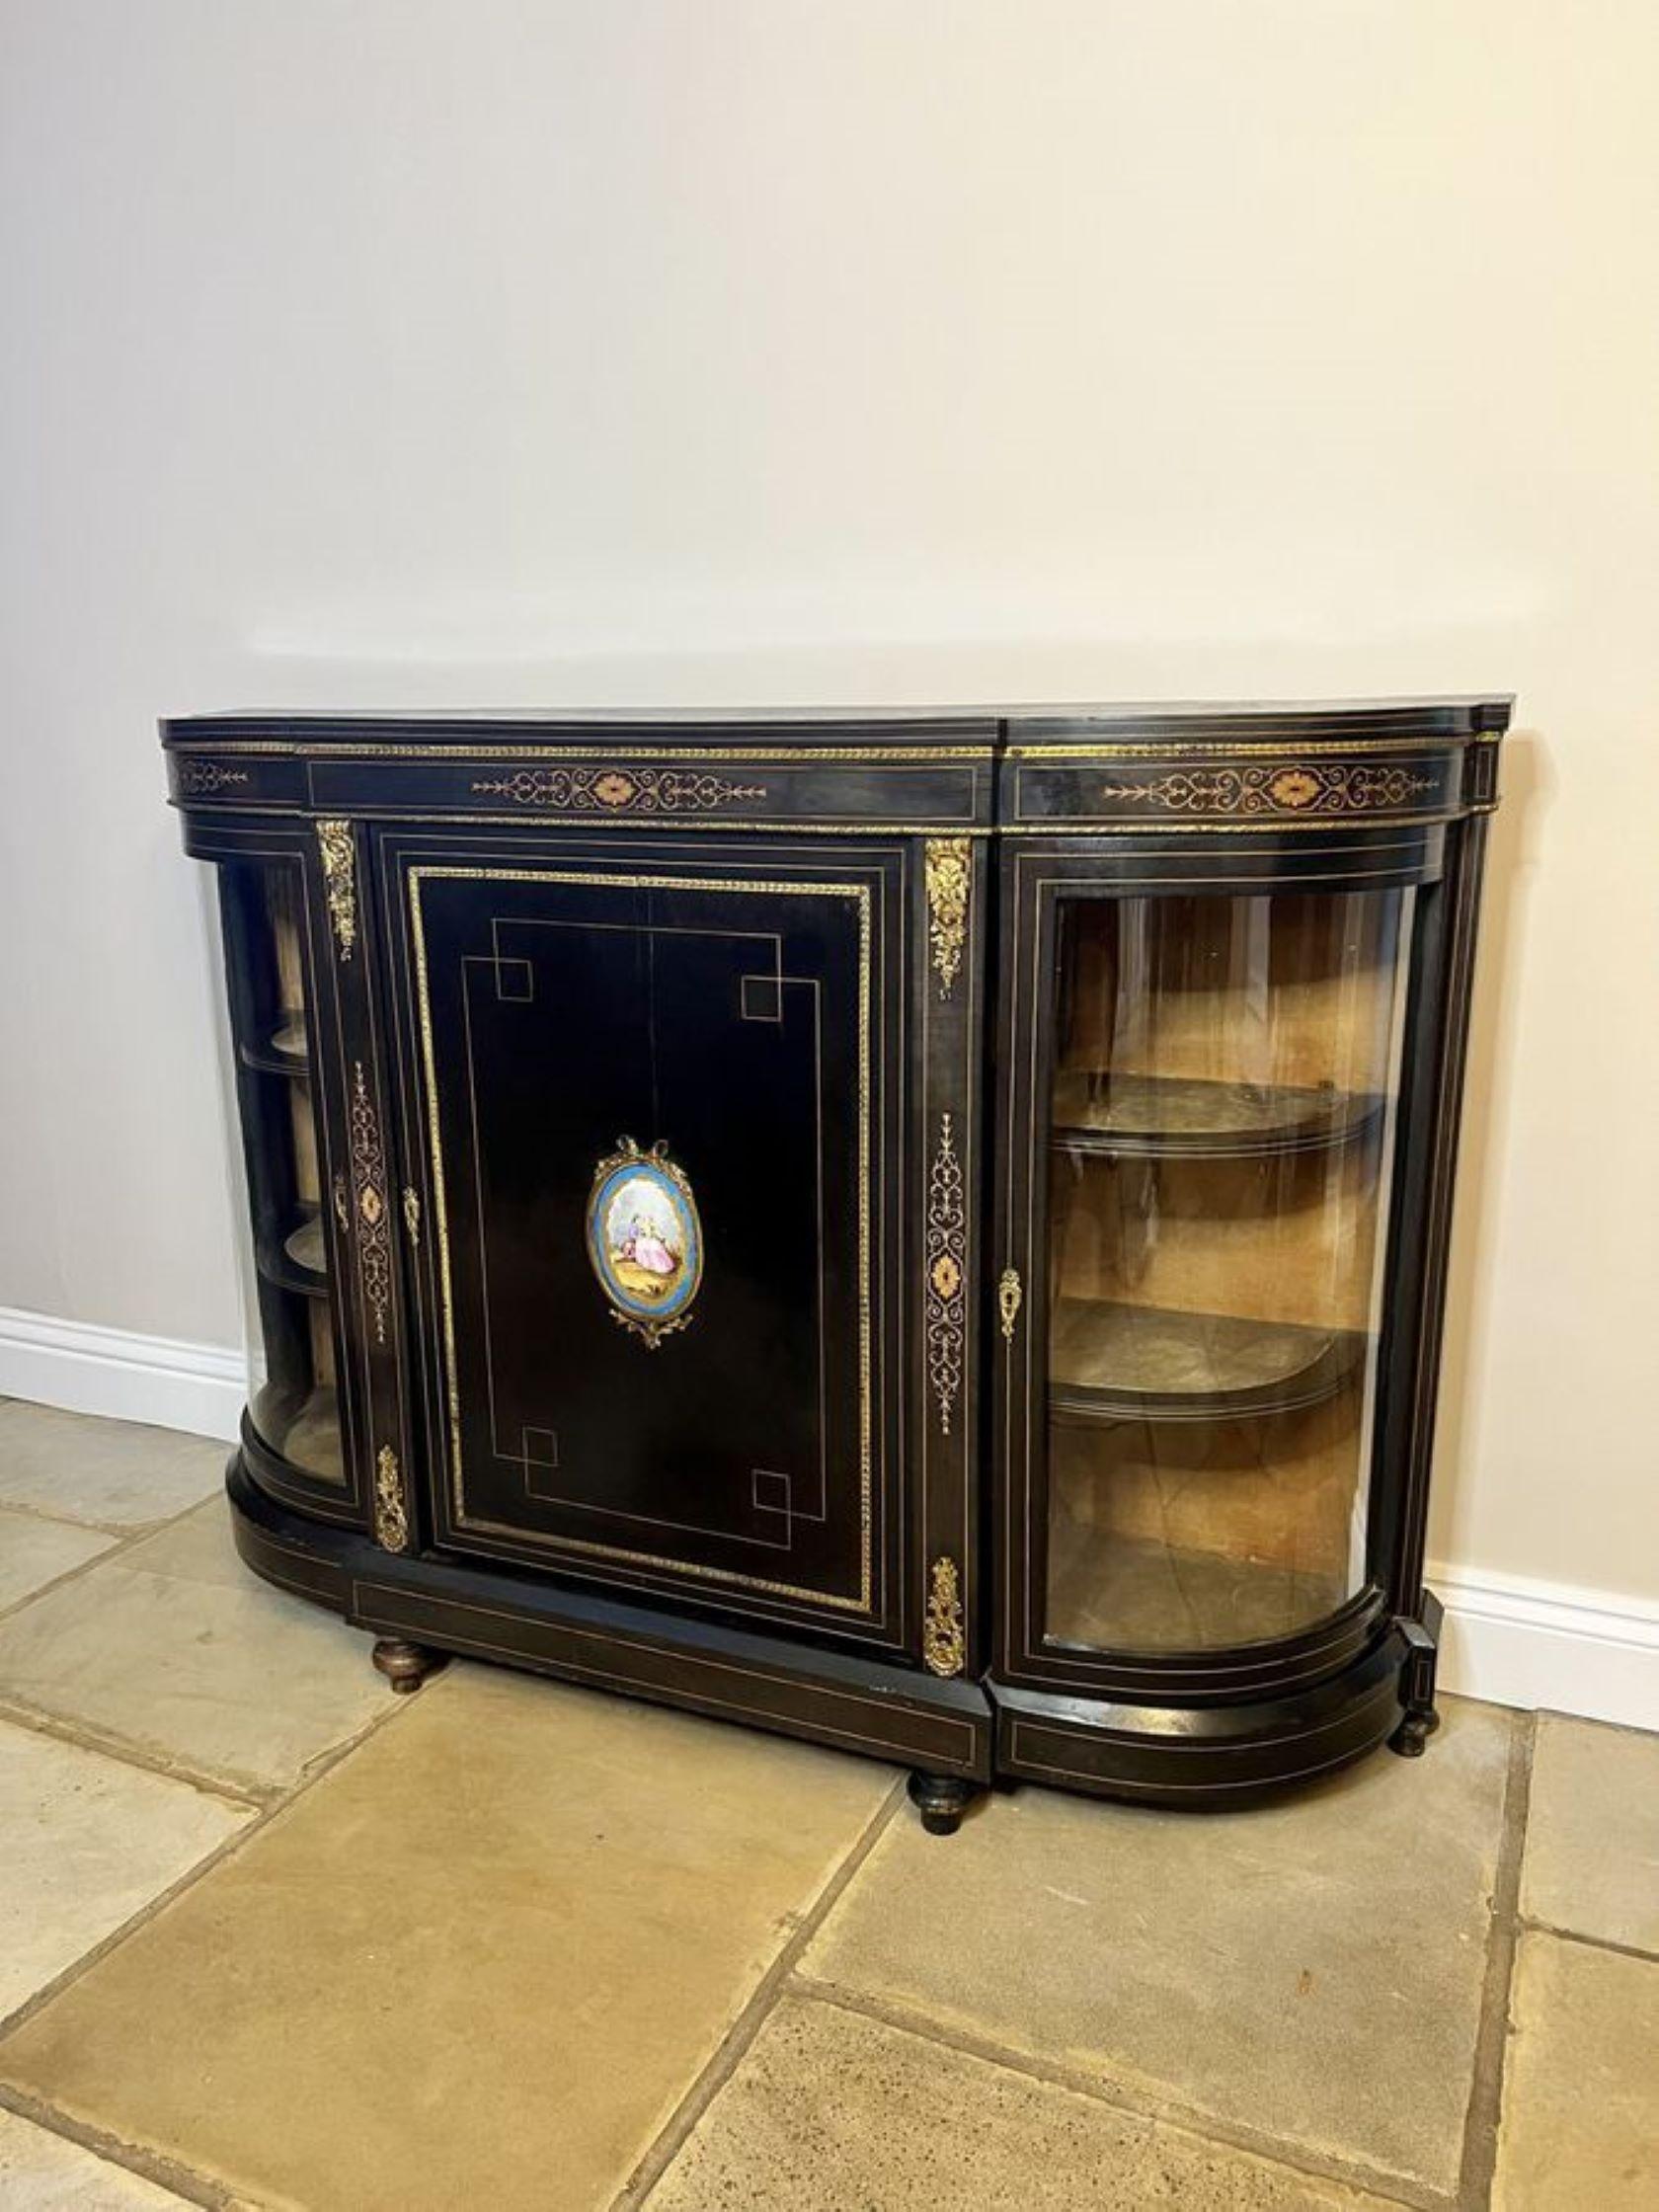 Antique Victorian quality ebonised inlaid credenza having a quality ebonised top above a inlaid frieze, a single ebonised door to the centre with a beautiful serves style plaque, flanked by two bow end glazed doors opening to reveal two display